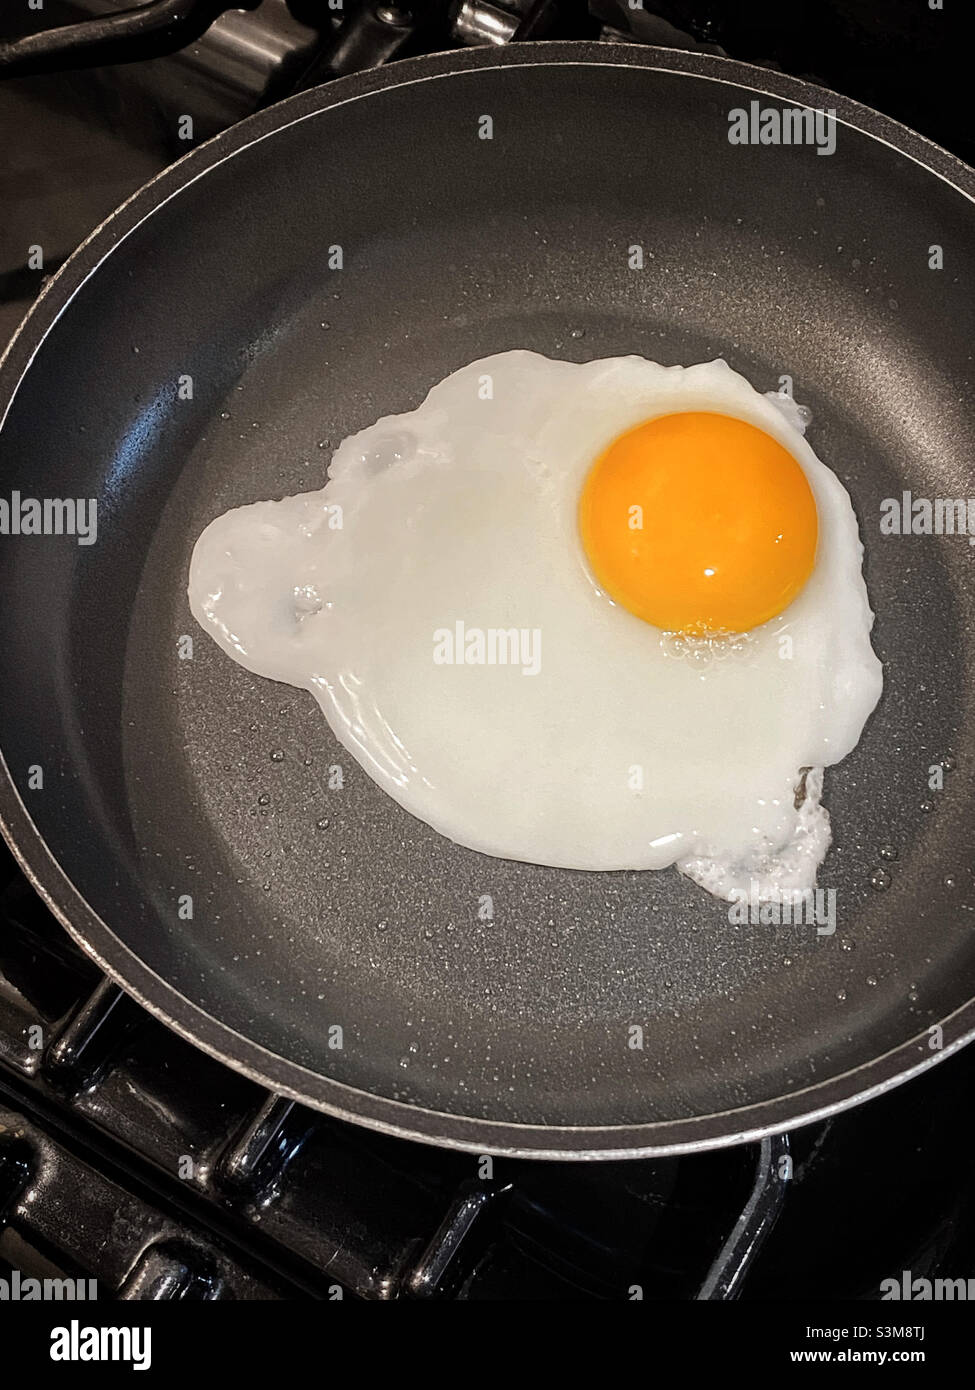 https://c8.alamy.com/comp/S3M8TJ/a-single-egg-is-being-pan-fried-over-a-gas-hob-a-large-amount-of-albumen-is-slowly-cooking-room-for-copy-and-text-photo-colin-hoskins-S3M8TJ.jpg